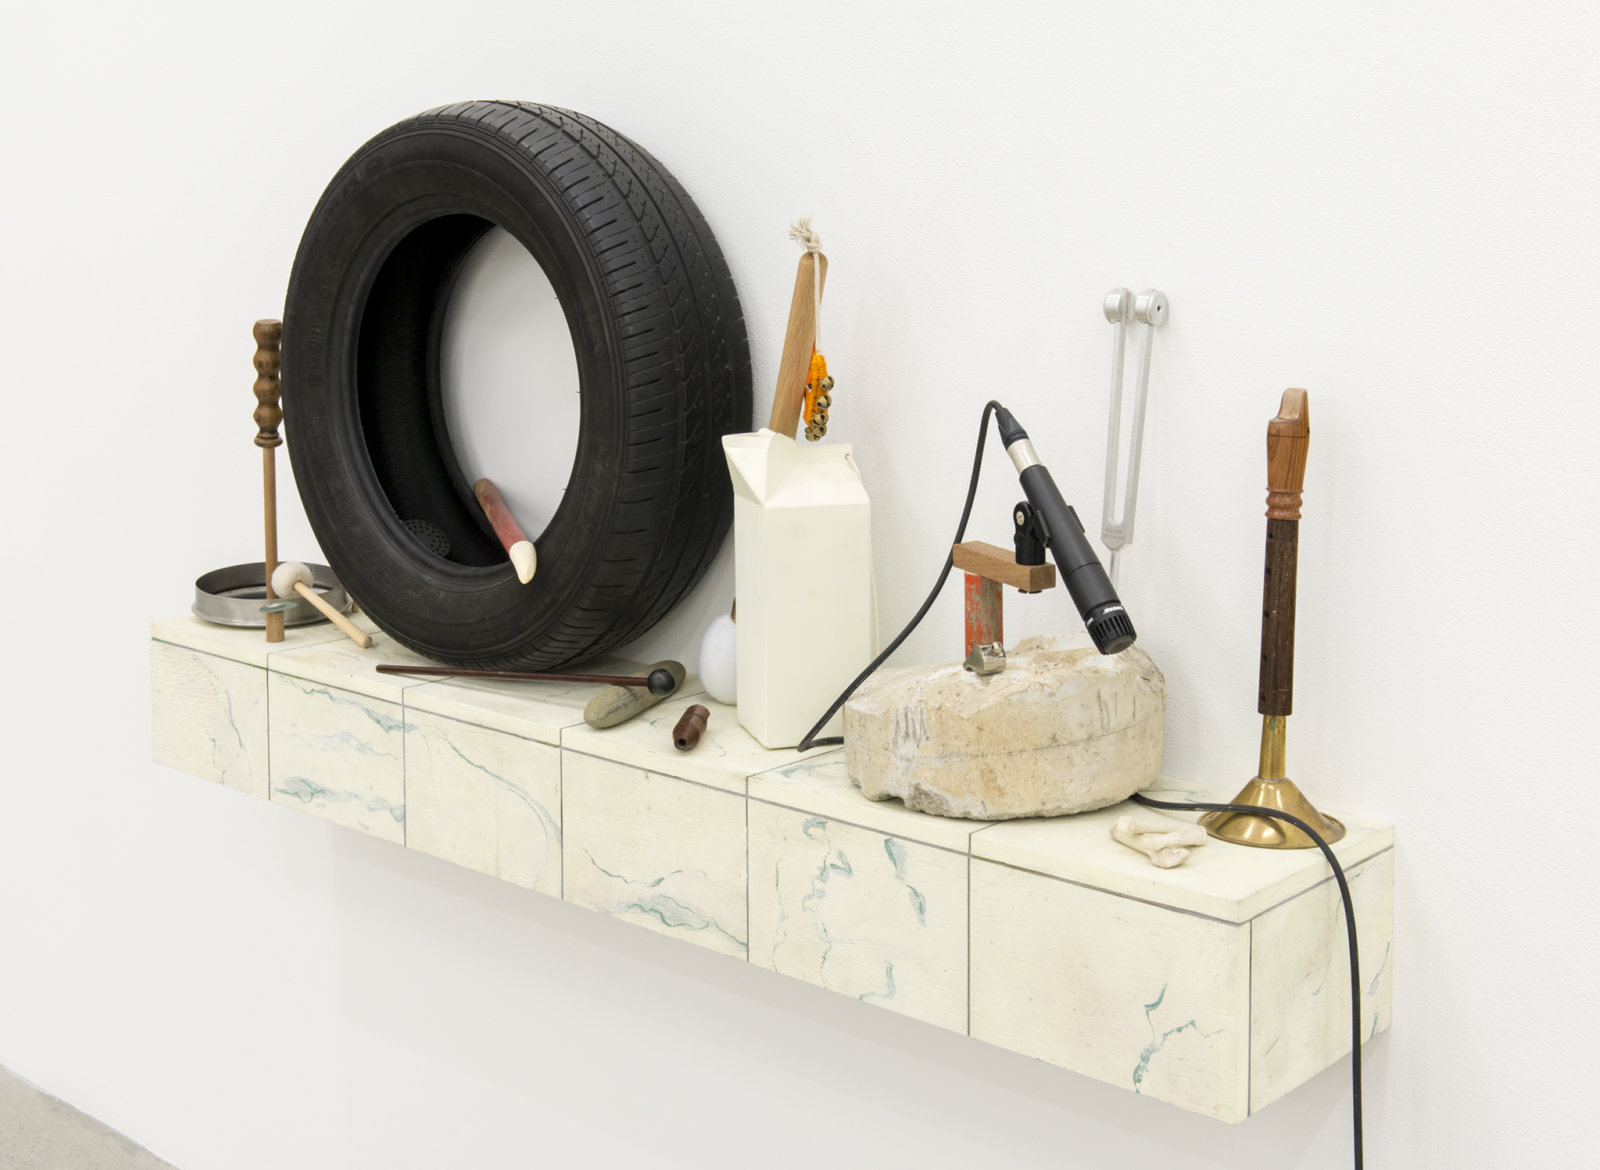 Ashes Withyman, Furnas, Altar, River, Musca, Compass, Cetus, Cup, 2017–2018, wood, tire, pot top, deer call, whale tooth, river stone, painted steel, microphone, concrete, bones, therapeutic tuning fork, stag call, whistles, homemade fox call, bells, musical instrument parts, painted plywood, 45 x 54 x 9 in. (114 x 137 x 23 cm)